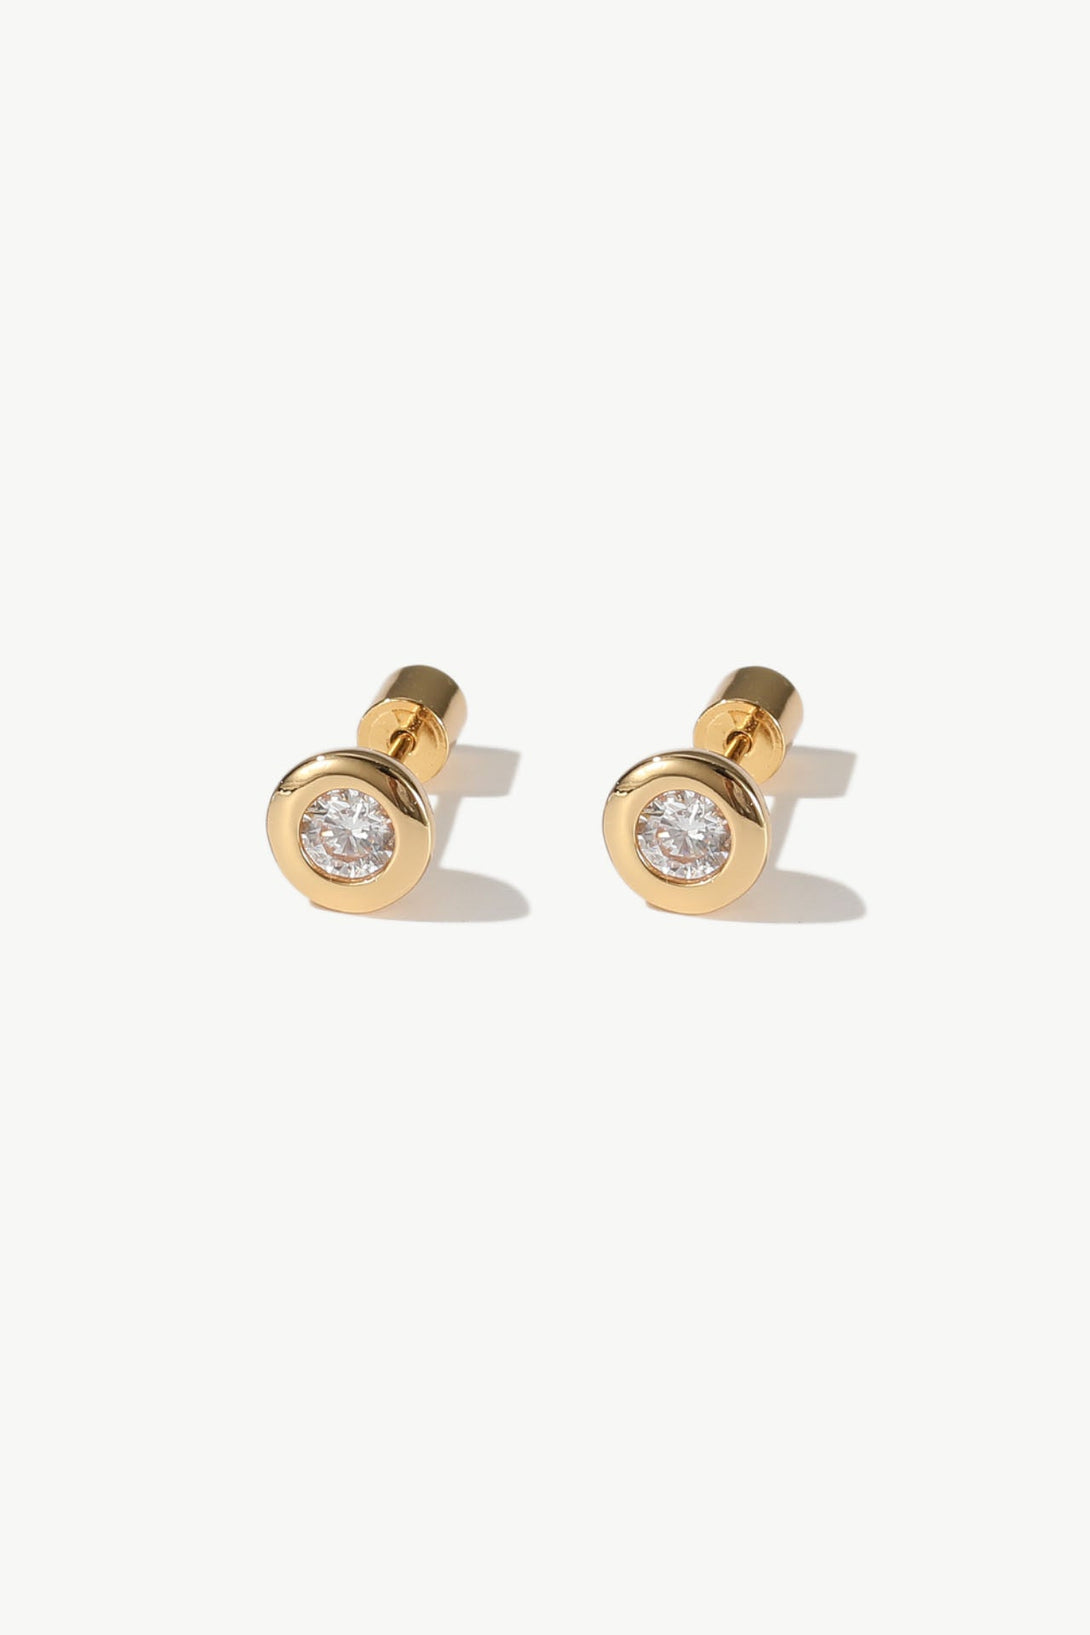 Aurora Gold Bezel Set White Clear Solitaire Stud Earrings - Classicharms